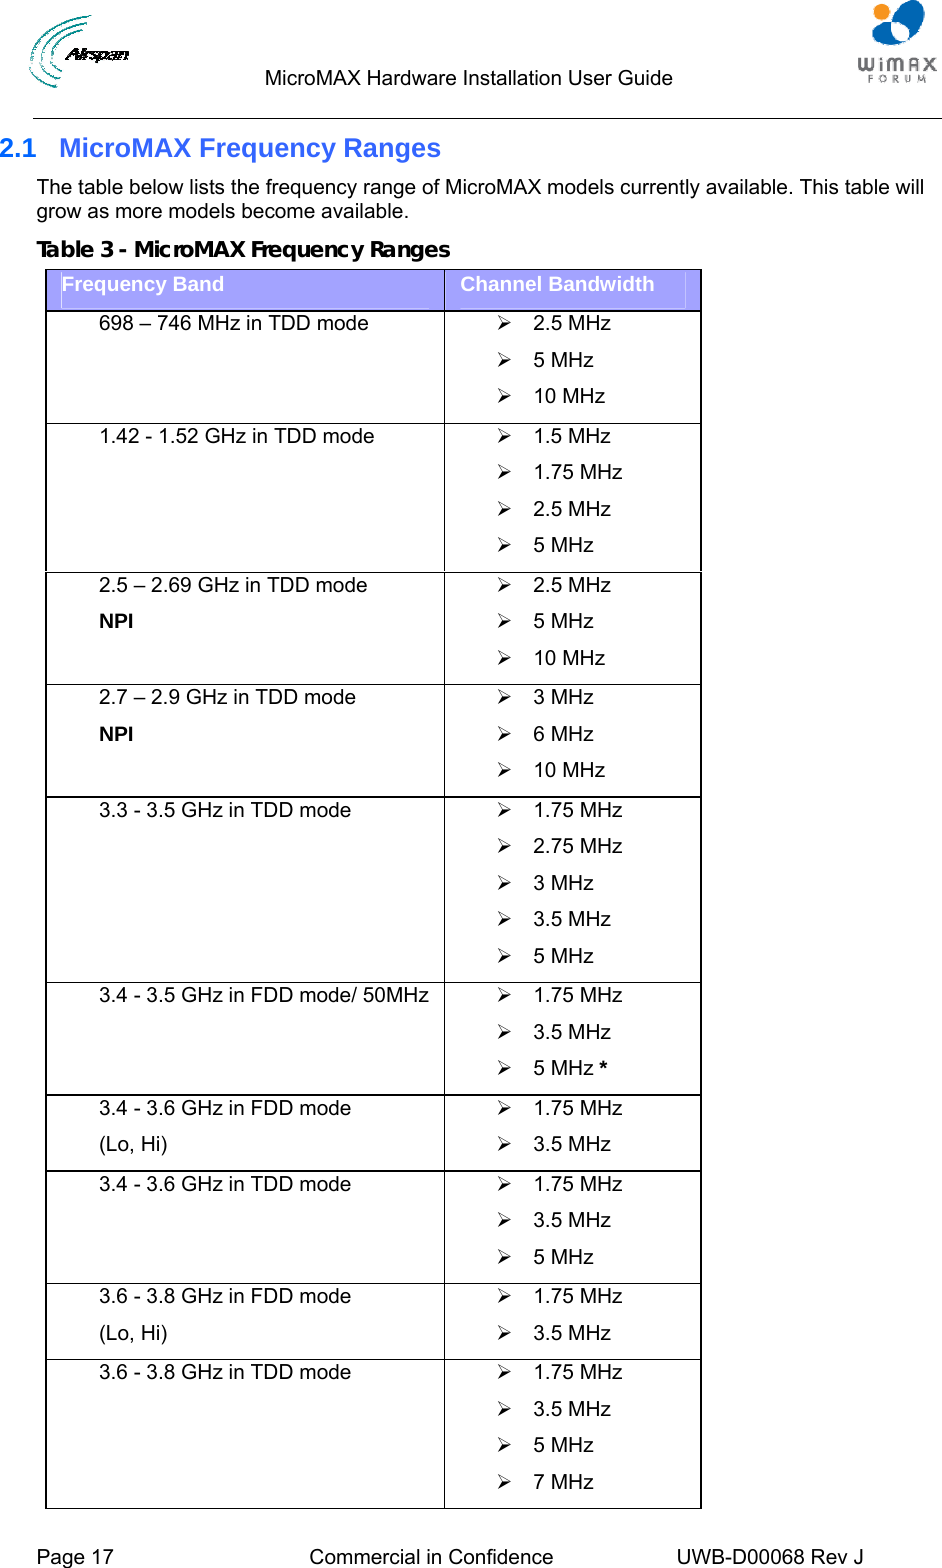                                  MicroMAX Hardware Installation User Guide     Page 17  Commercial in Confidence  UWB-D00068 Rev J   2.1  MicroMAX Frequency Ranges The table below lists the frequency range of MicroMAX models currently available. This table will grow as more models become available. Table 3 - MicroMAX Frequency Ranges Frequency Band  Channel Bandwidth 698 – 746 MHz in TDD mode  ¾ 2.5 MHz ¾ 5 MHz ¾ 10 MHz 1.42 - 1.52 GHz in TDD mode  ¾ 1.5 MHz   ¾  1.75 MHz  ¾ 2.5 MHz ¾ 5 MHz 2.5 – 2.69 GHz in TDD mode NPI ¾ 2.5 MHz ¾ 5 MHz ¾ 10 MHz 2.7 – 2.9 GHz in TDD mode NPI ¾ 3 MHz ¾ 6 MHz ¾ 10 MHz 3.3 - 3.5 GHz in TDD mode  ¾  1.75 MHz  ¾ 2.75 MHz ¾ 3 MHz ¾ 3.5 MHz ¾ 5 MHz 3.4 - 3.5 GHz in FDD mode/ 50MHz  ¾ 1.75 MHz ¾ 3.5 MHz ¾ 5 MHz * 3.4 - 3.6 GHz in FDD mode (Lo, Hi) ¾ 1.75 MHz ¾ 3.5 MHz 3.4 - 3.6 GHz in TDD mode  ¾ 1.75 MHz ¾ 3.5 MHz ¾ 5 MHz 3.6 - 3.8 GHz in FDD mode (Lo, Hi) ¾ 1.75 MHz ¾ 3.5 MHz 3.6 - 3.8 GHz in TDD mode  ¾ 1.75 MHz ¾ 3.5 MHz ¾ 5 MHz ¾ 7 MHz 